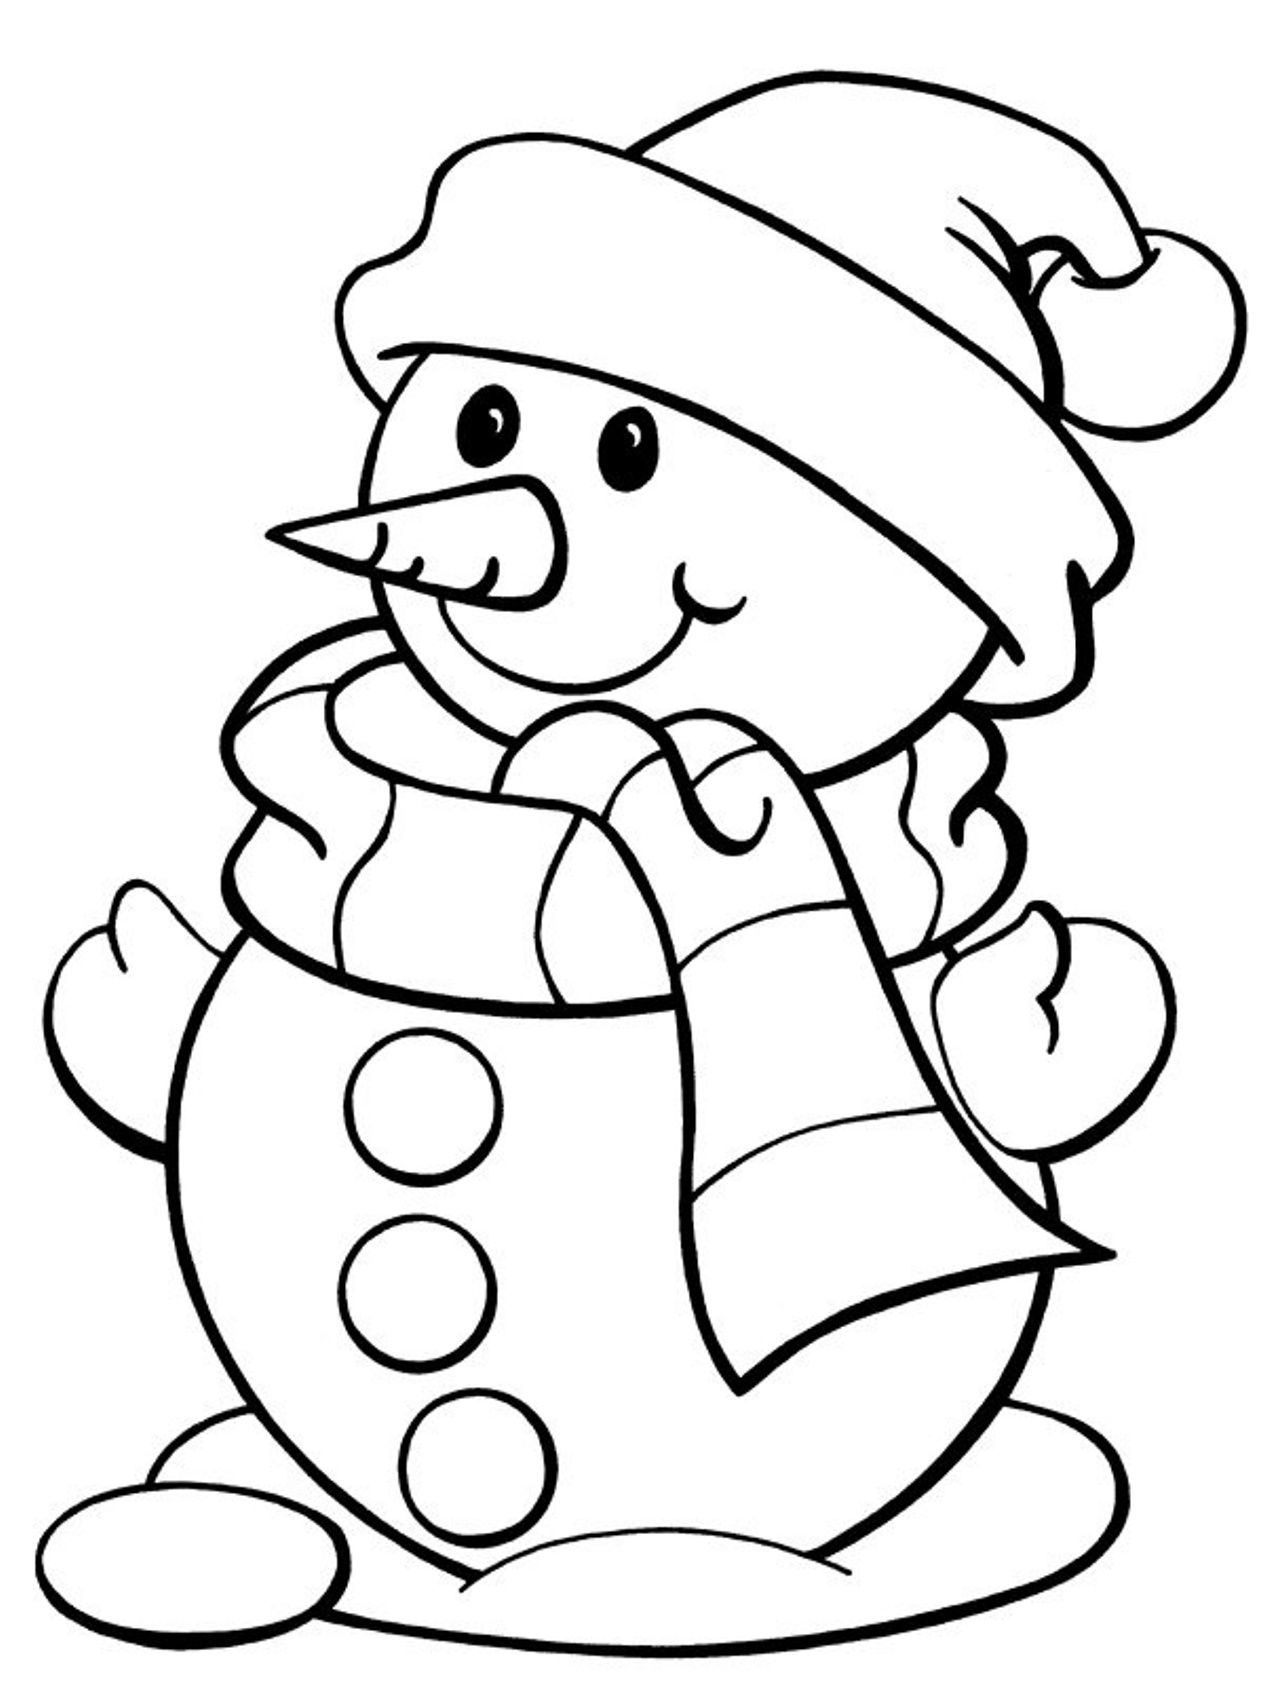 Winter Coloring Pages - Google Search | Winter Party | Christmas - Free Printable Winter Coloring Pages